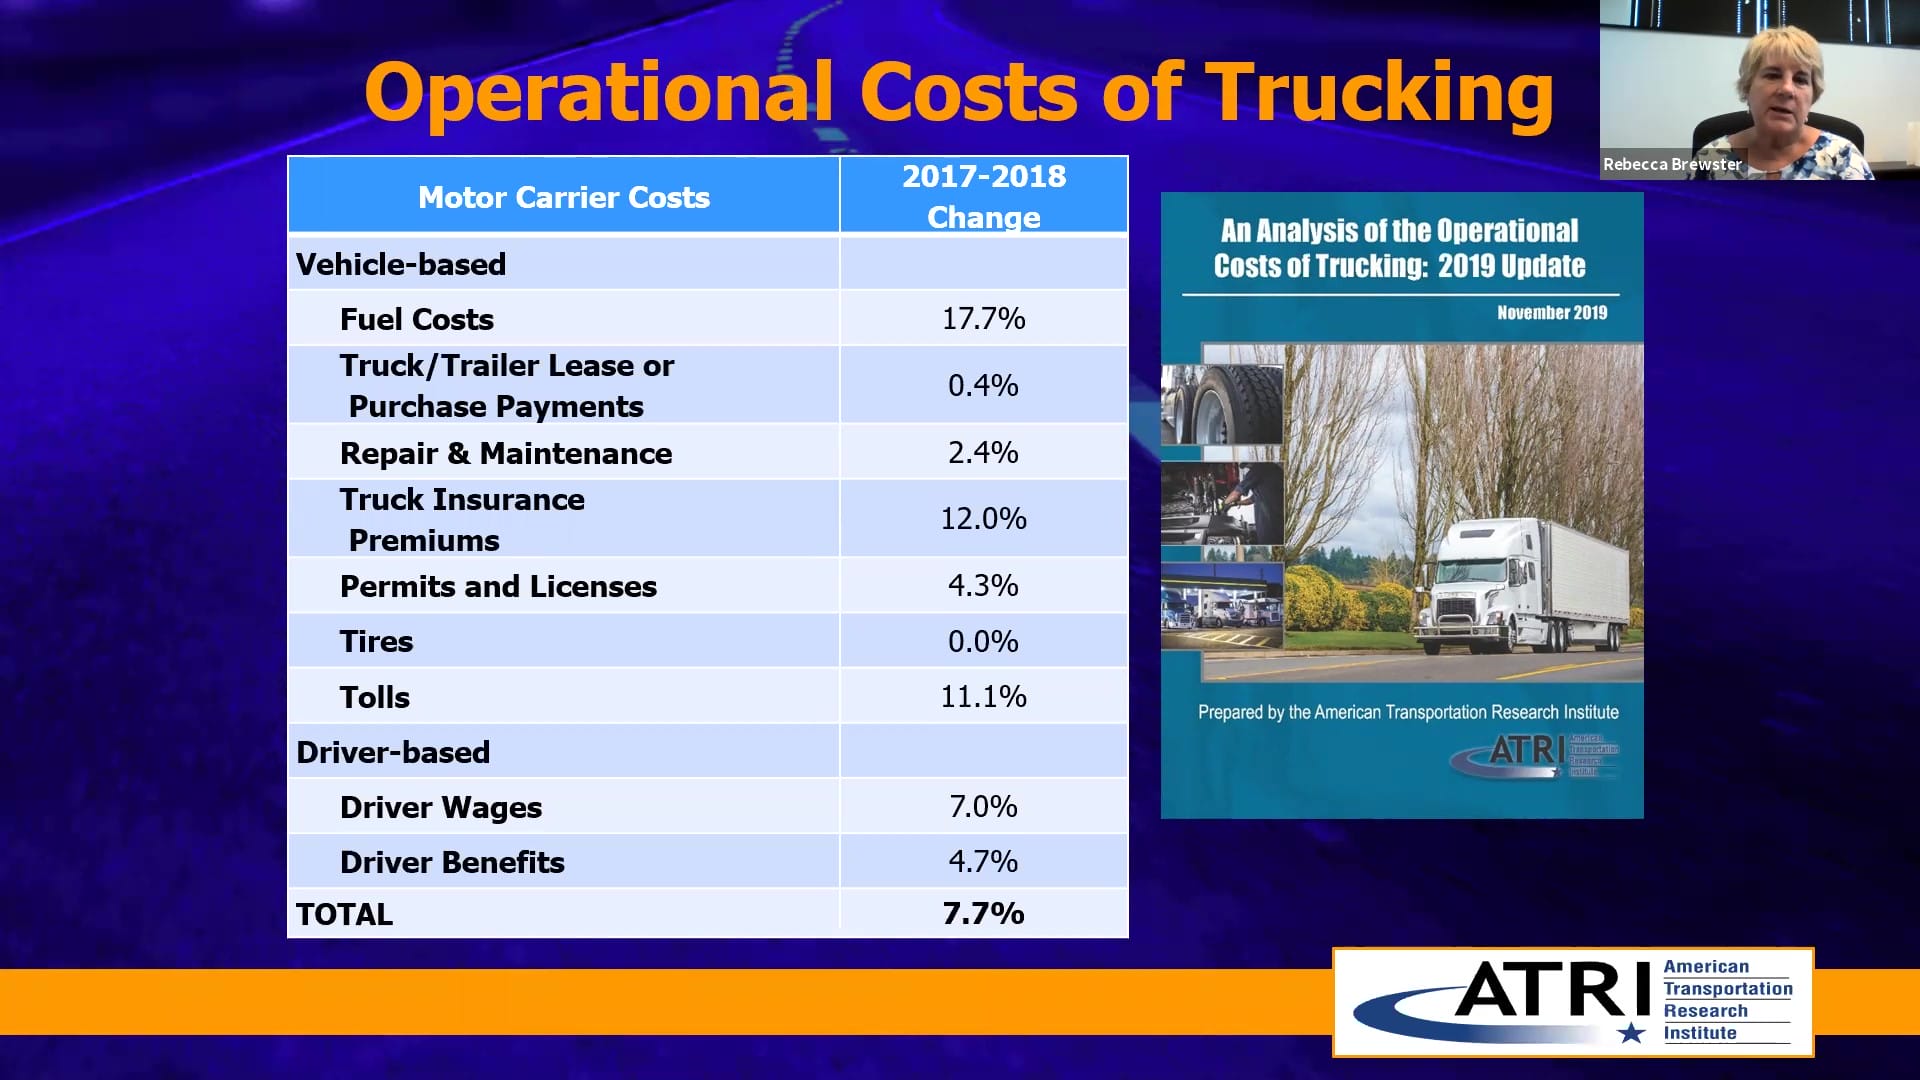 Trucking Industry Concerns 2020 from ATRI Operational Costs